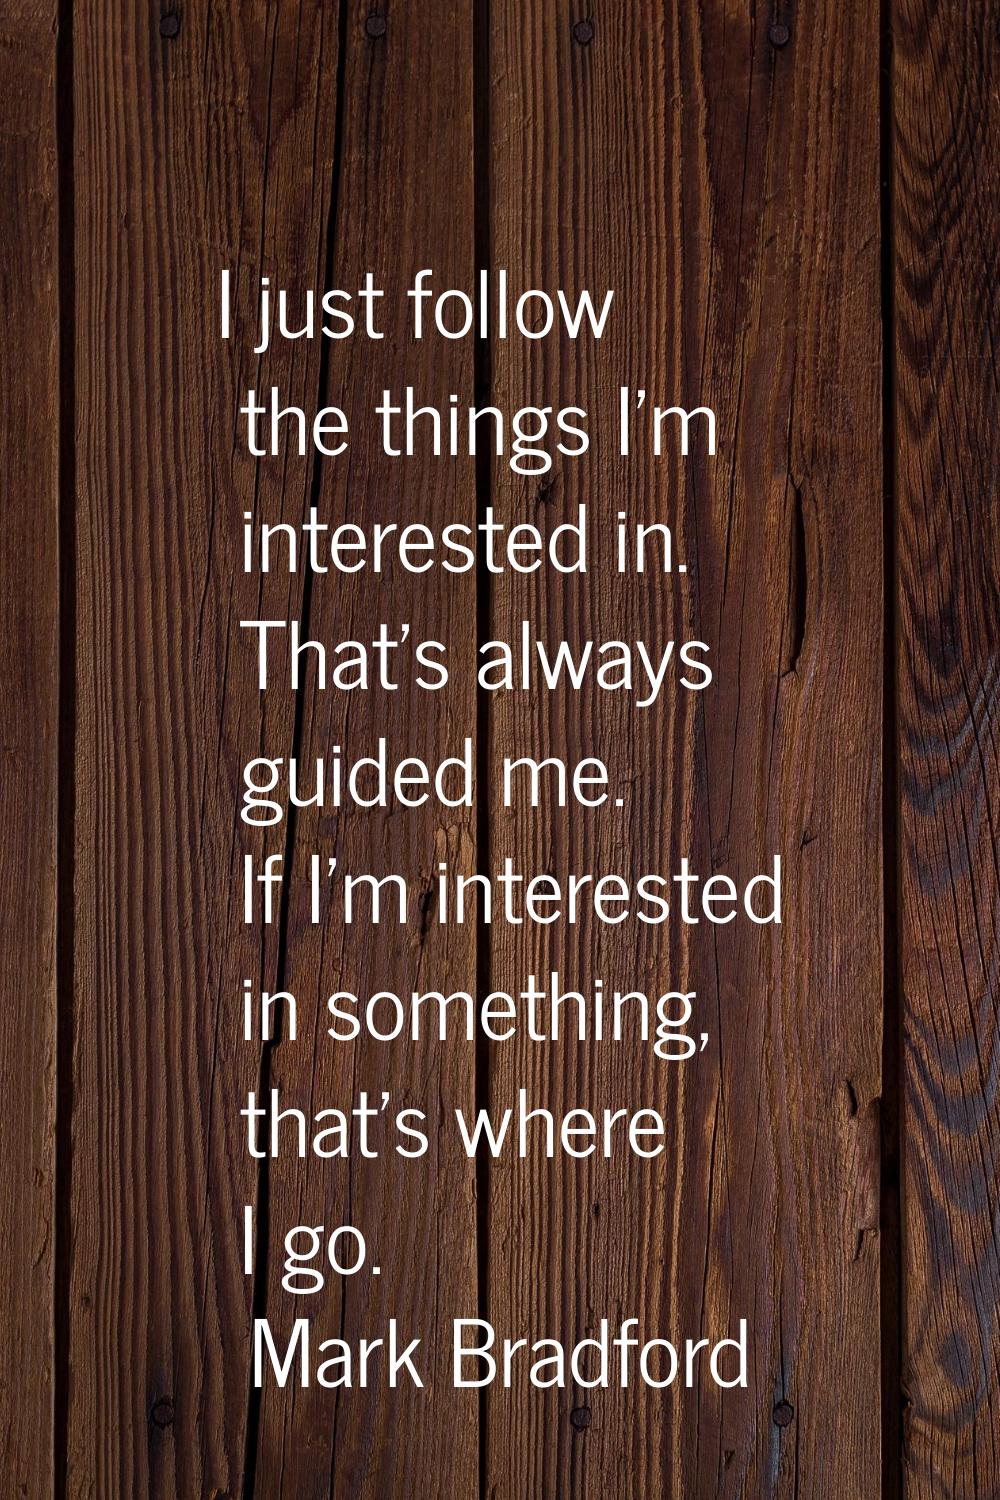 I just follow the things I'm interested in. That's always guided me. If I'm interested in something